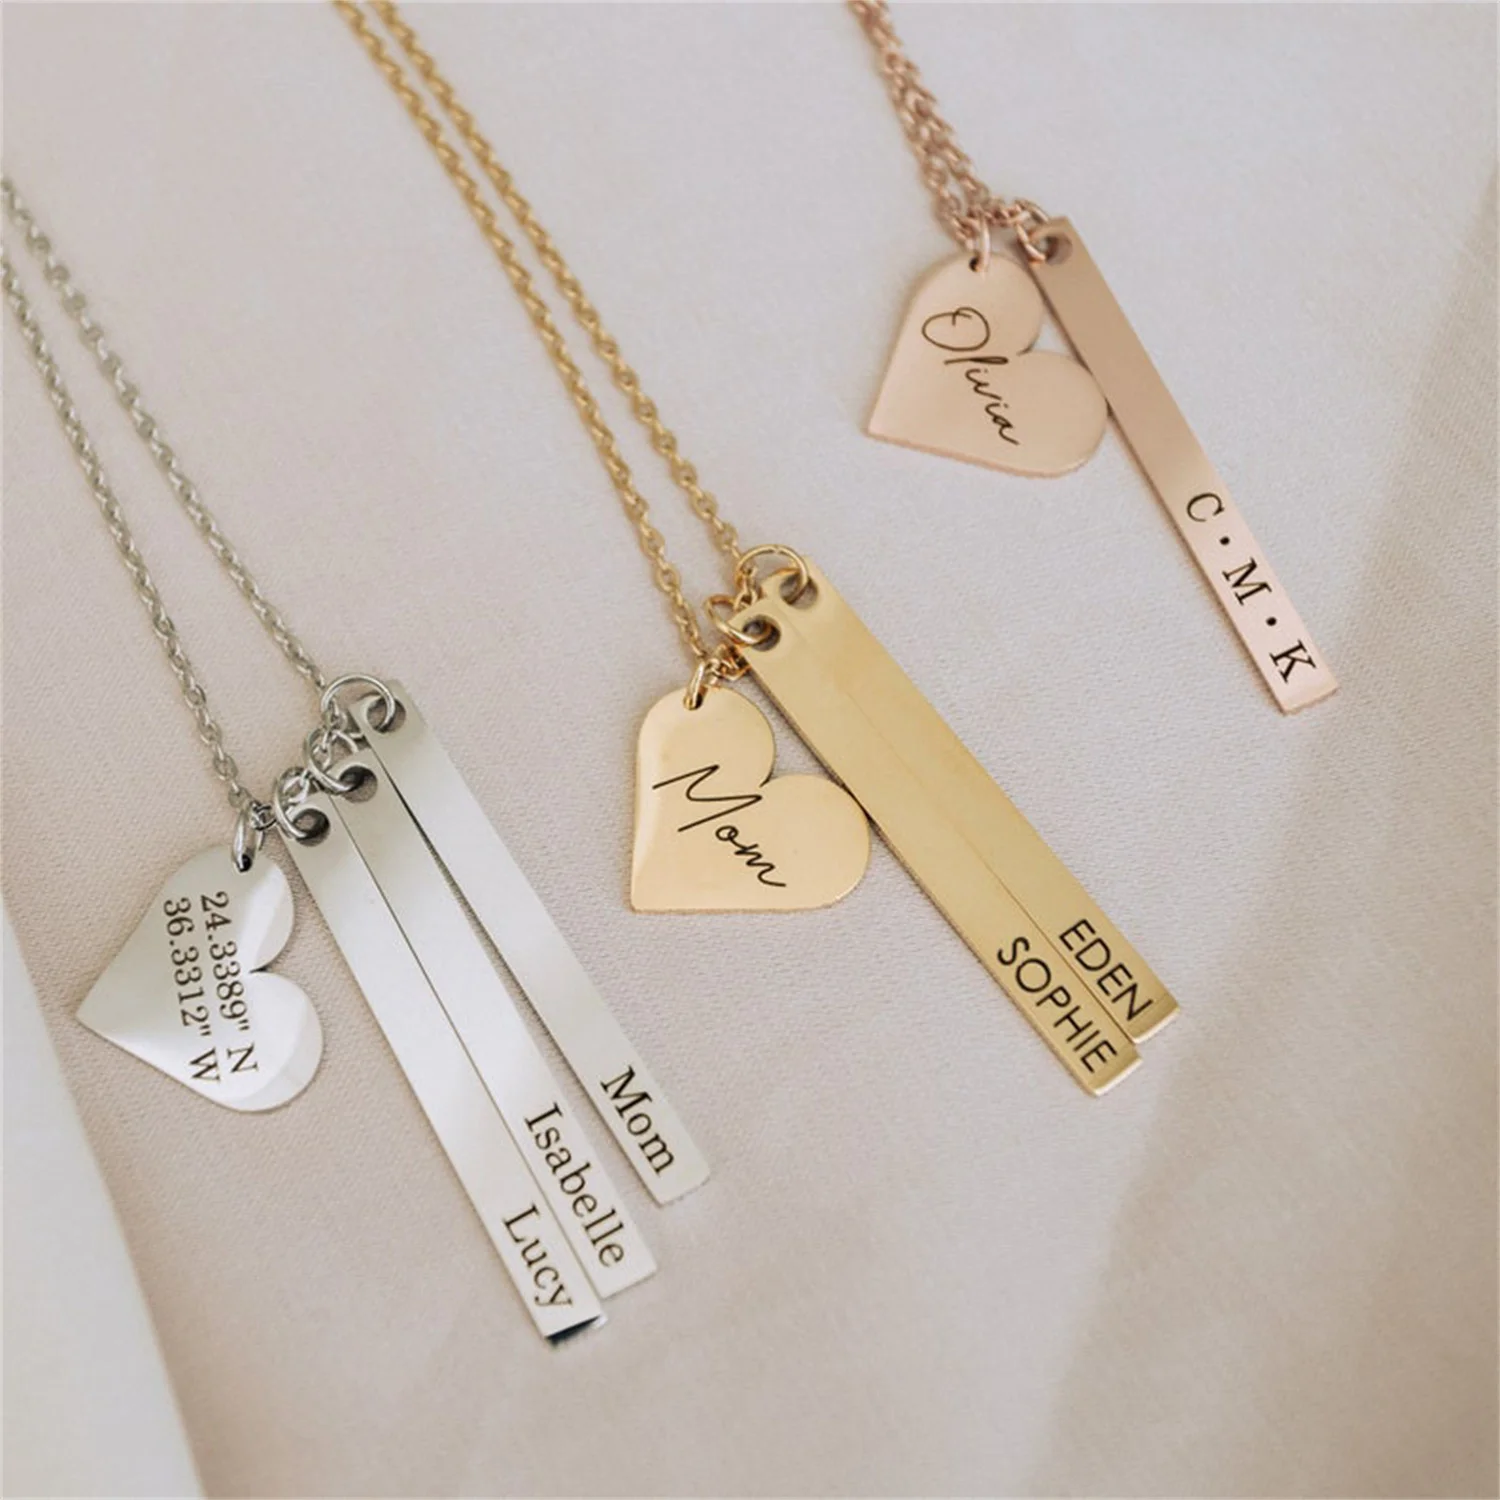 Personalized Engraved Name Bar Necklace Custom Heart Gold Charm Pendant Stainless Steel Jewelry Exquisite Gift For Family Friend